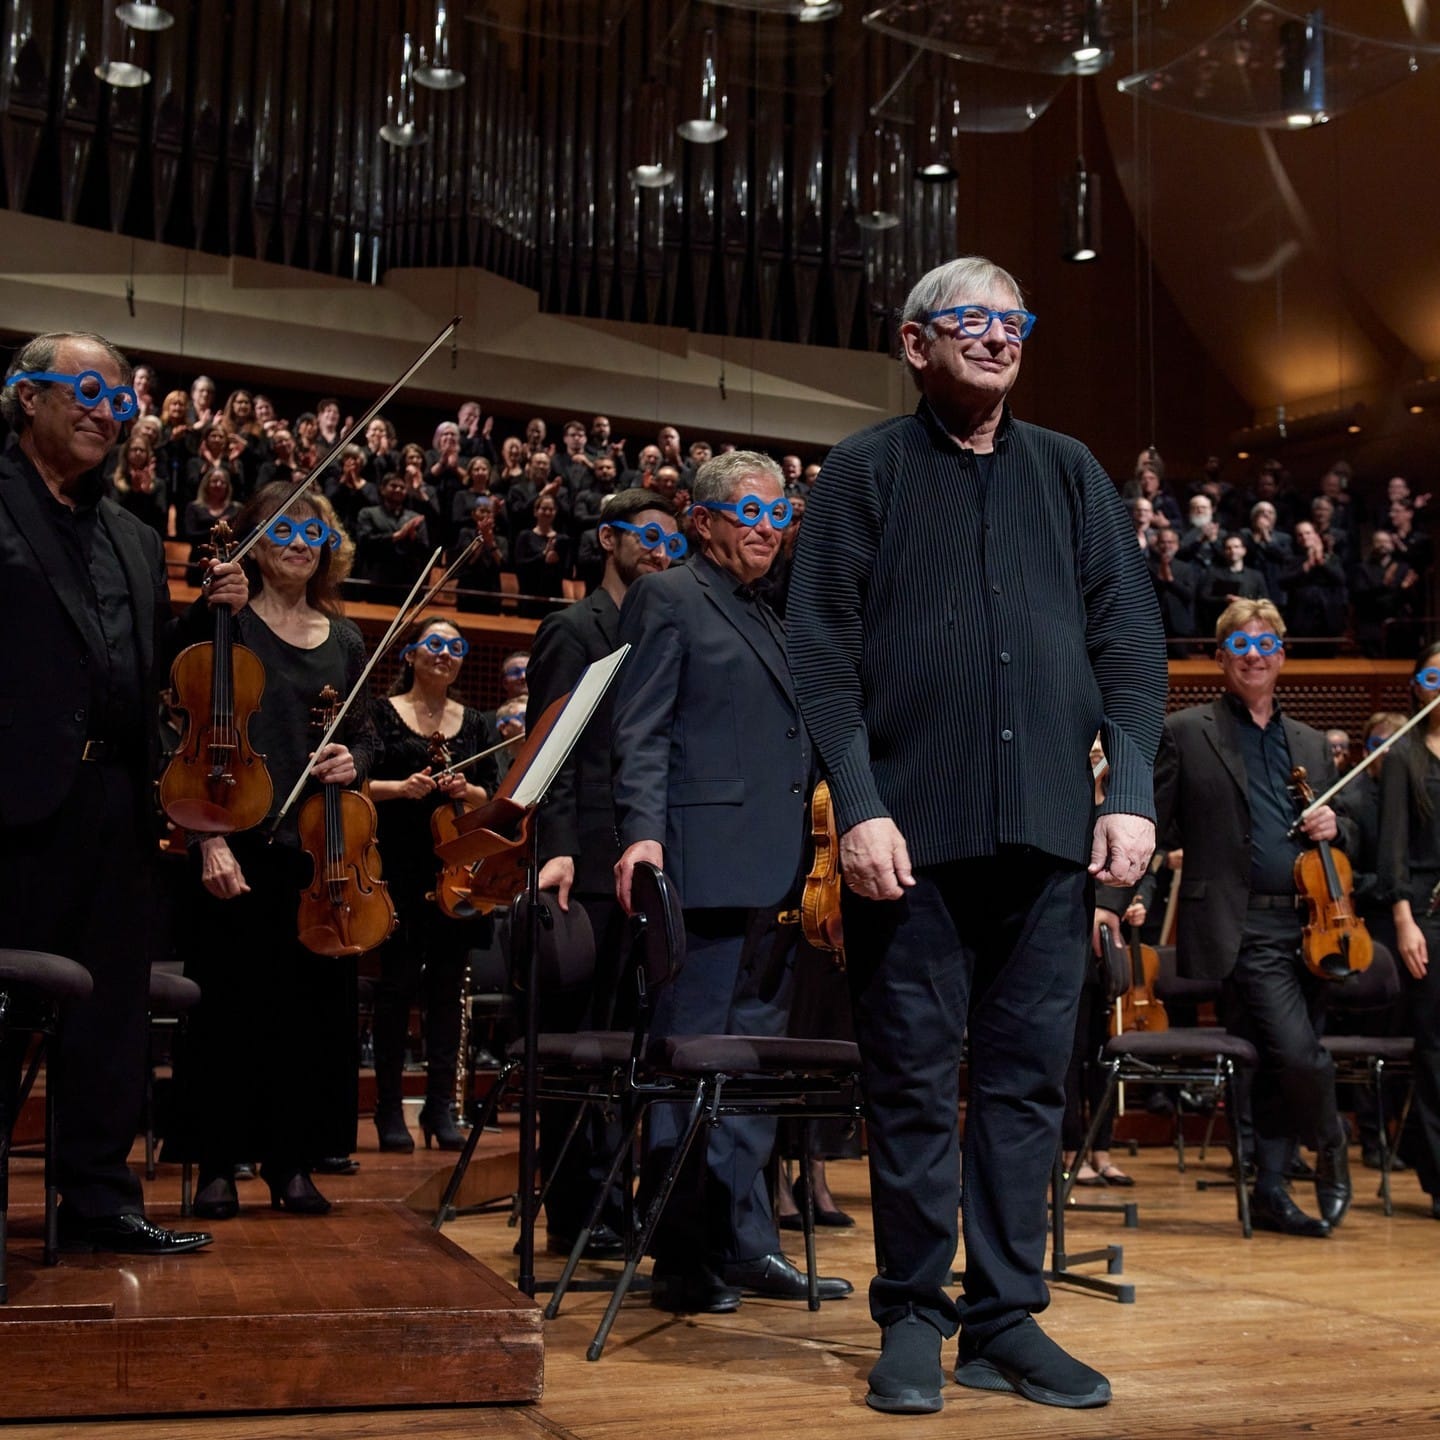 The orchestra wore blue glasses